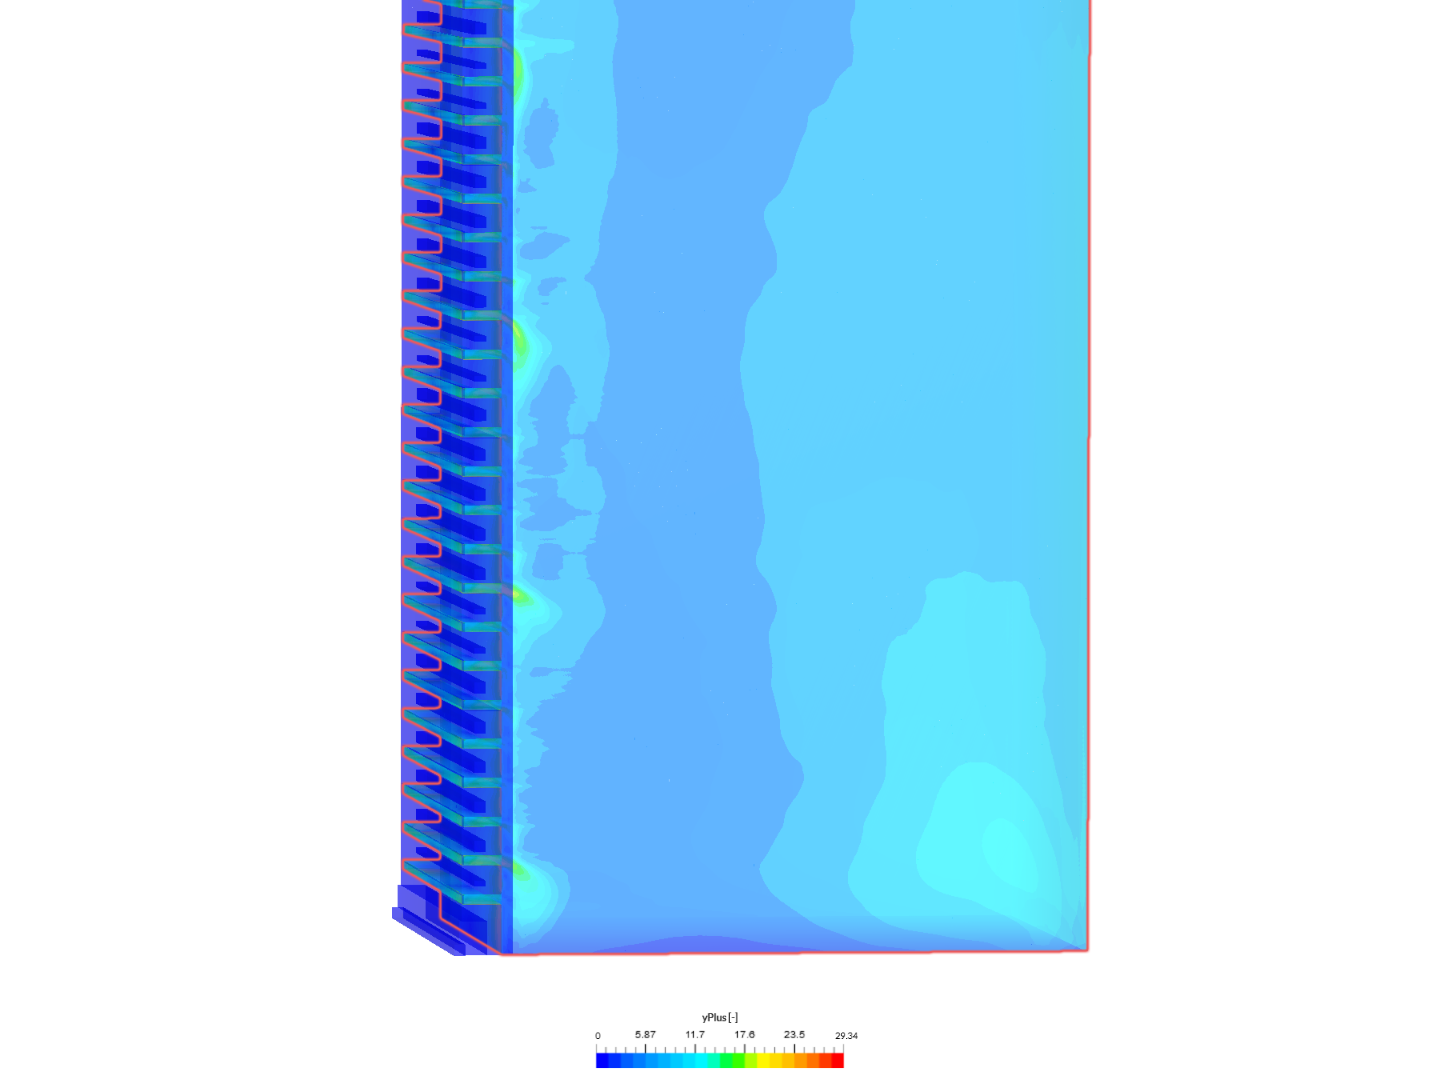 Mean surface pressure for buildings with balconies image